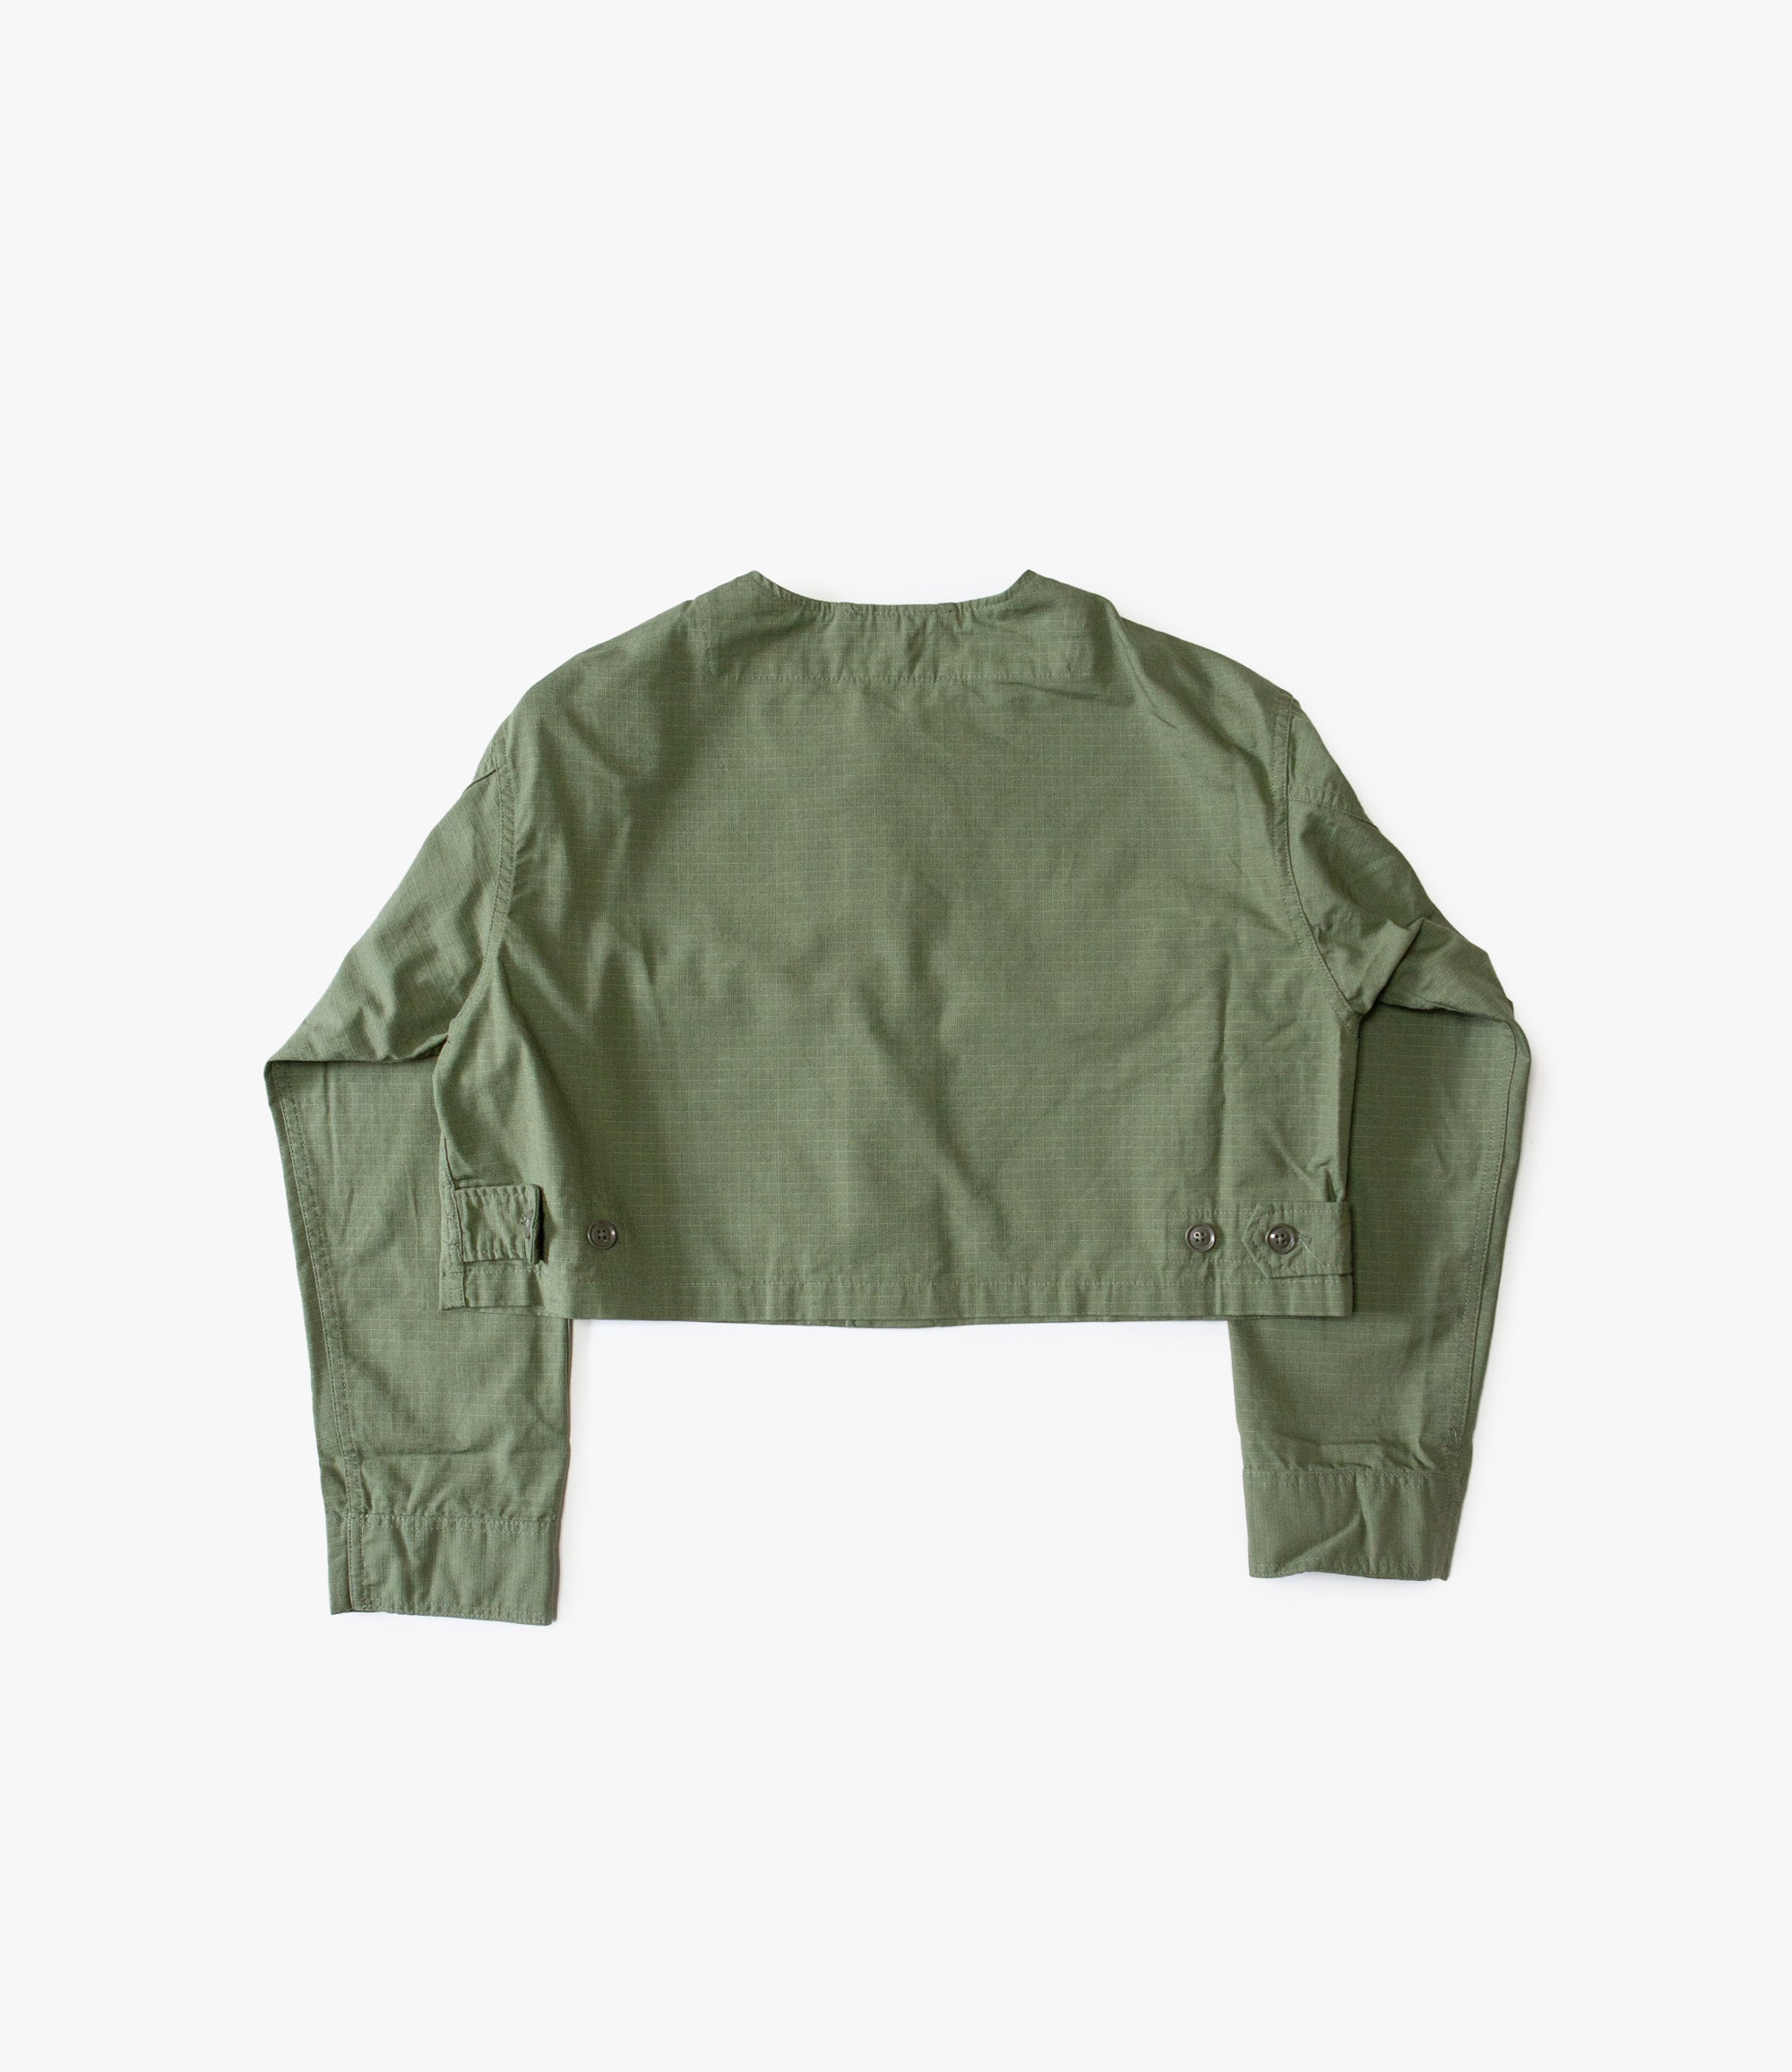 Nepenthes London Online Shop - Needles, Engineered Garments & more